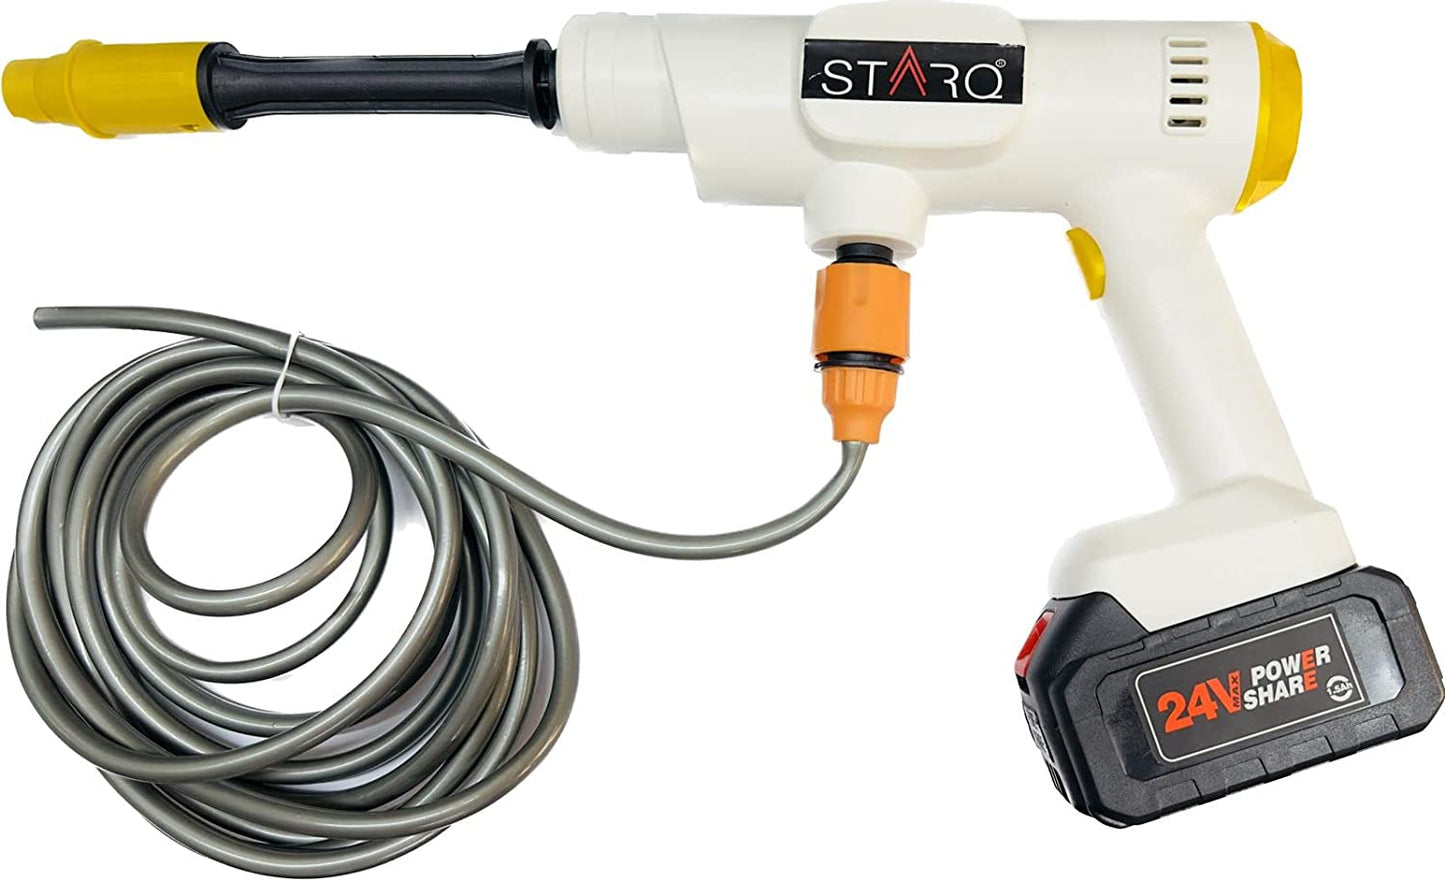 STARQ Cordless 24V Car Pressure Washer Power Washer with Accessories Portable Power Cleaner